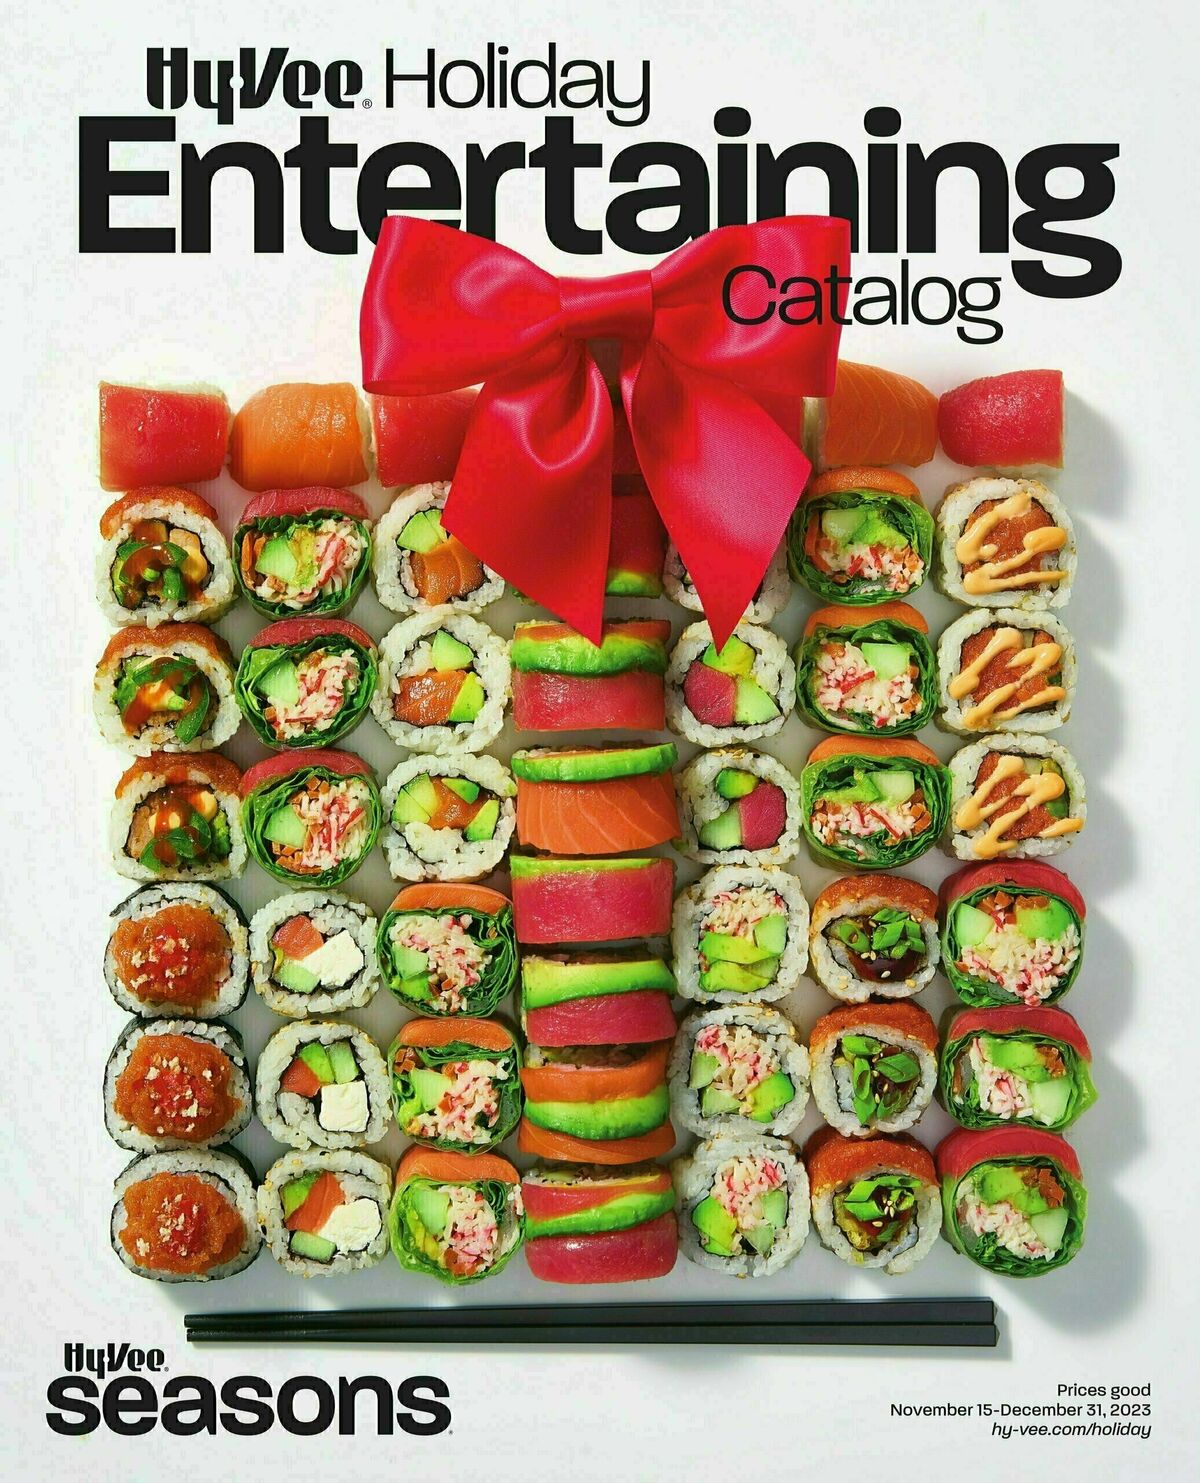 Hy-Vee Holiday Entertaining Guide Weekly Ad from November 4